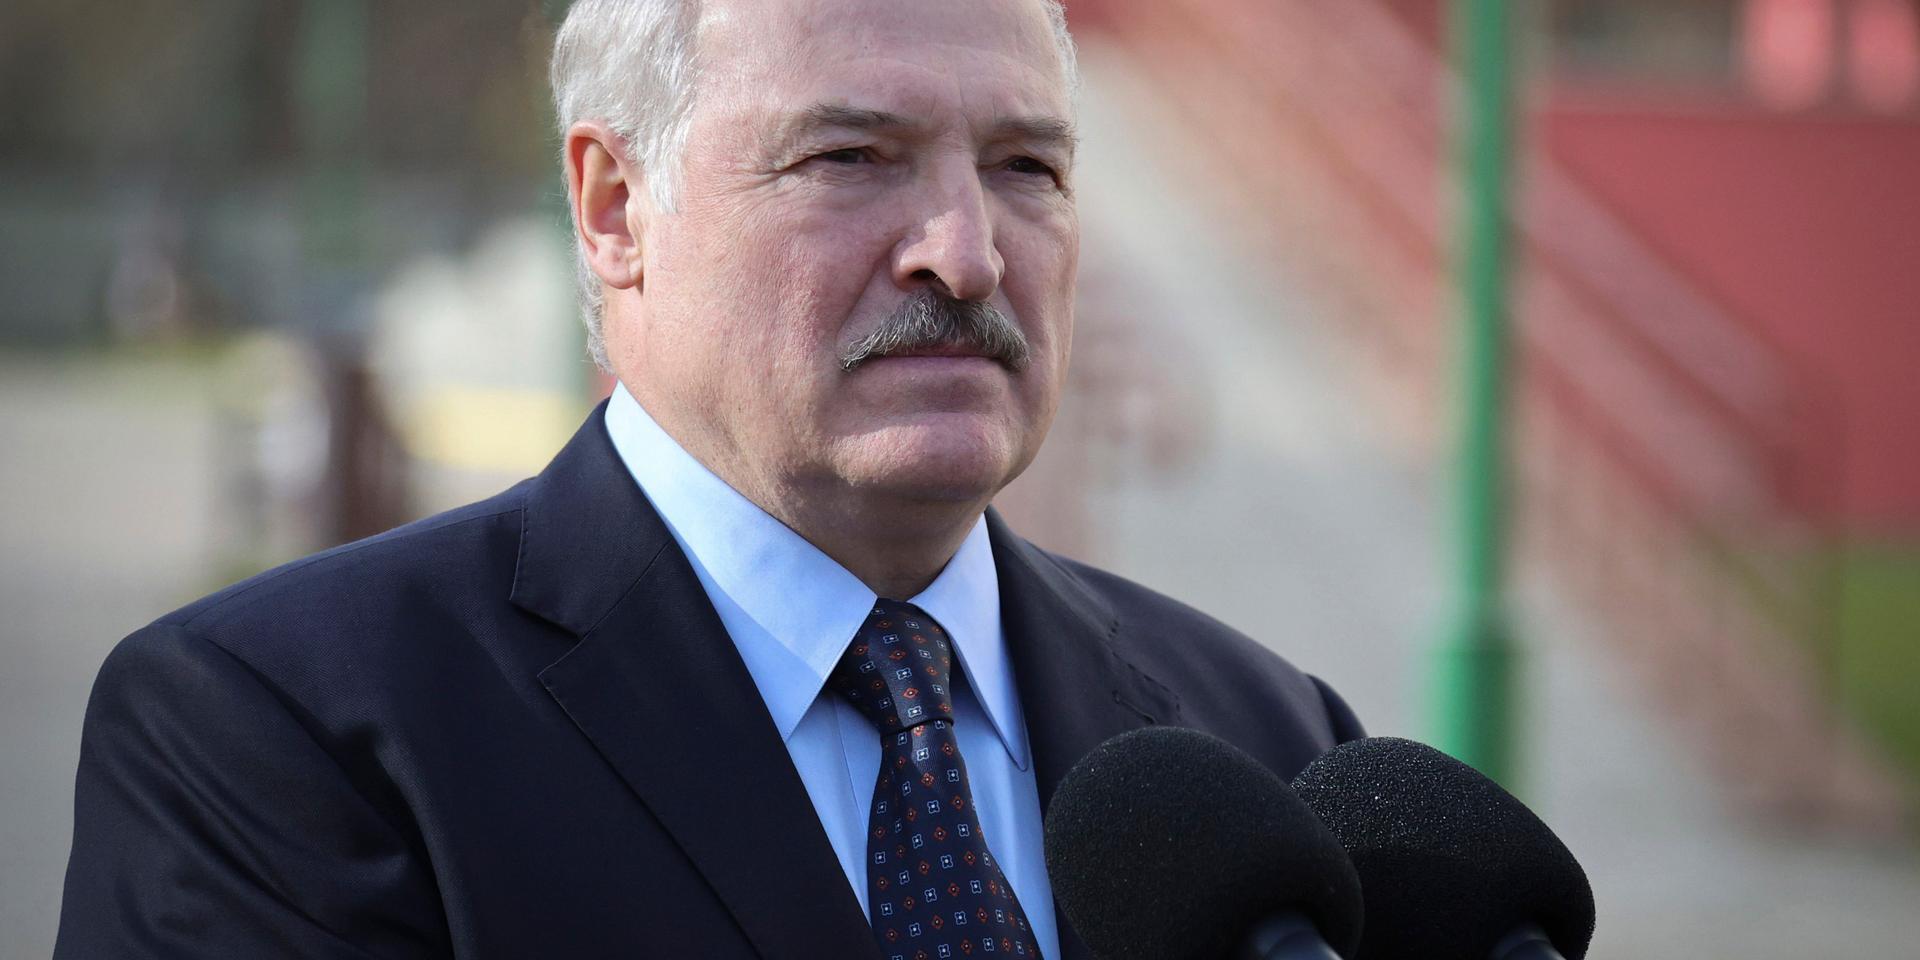 In this photo taken on Tuesday, Oct. 26, 2021, Belarusian President Alexander Lukashenko attends meeting with medical staff as he visits the hospital in the western city of Lida, 150 km (93 miles) of Minsk, Belarus. Belarusian authorities abolished mask mandates less than two weeks after their introduction for the first time in the pandemic, after Lukashenko dismissed them as unnecessary even as the country faced a spike in contagion. (Maxim Guchek/BelTA Pool Photo via AP)  XSG103